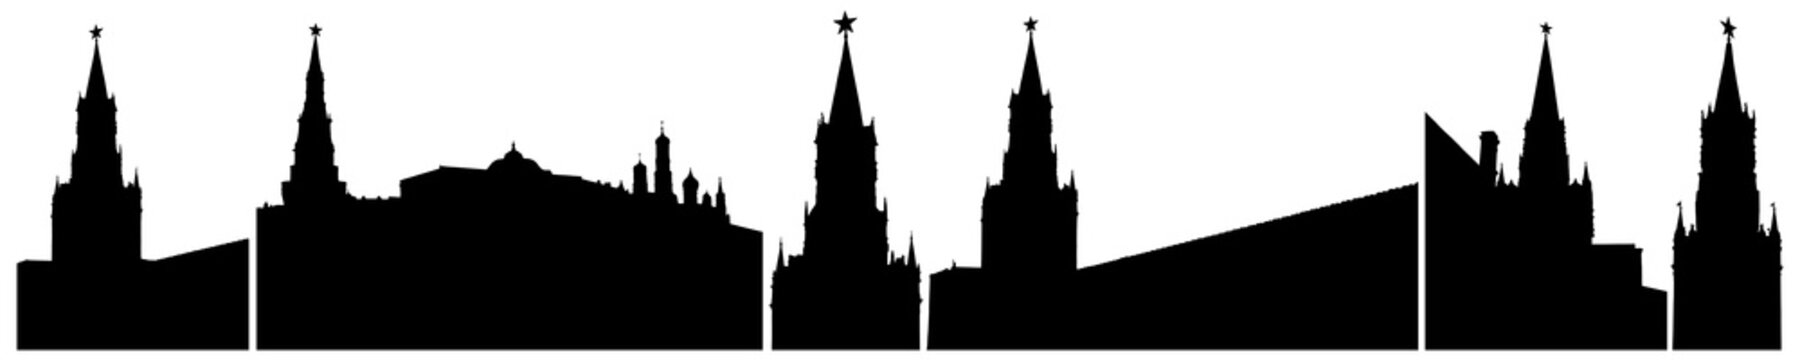 Moscow Kremlin in Russia, silhouettes isolated, set. Vector illustration